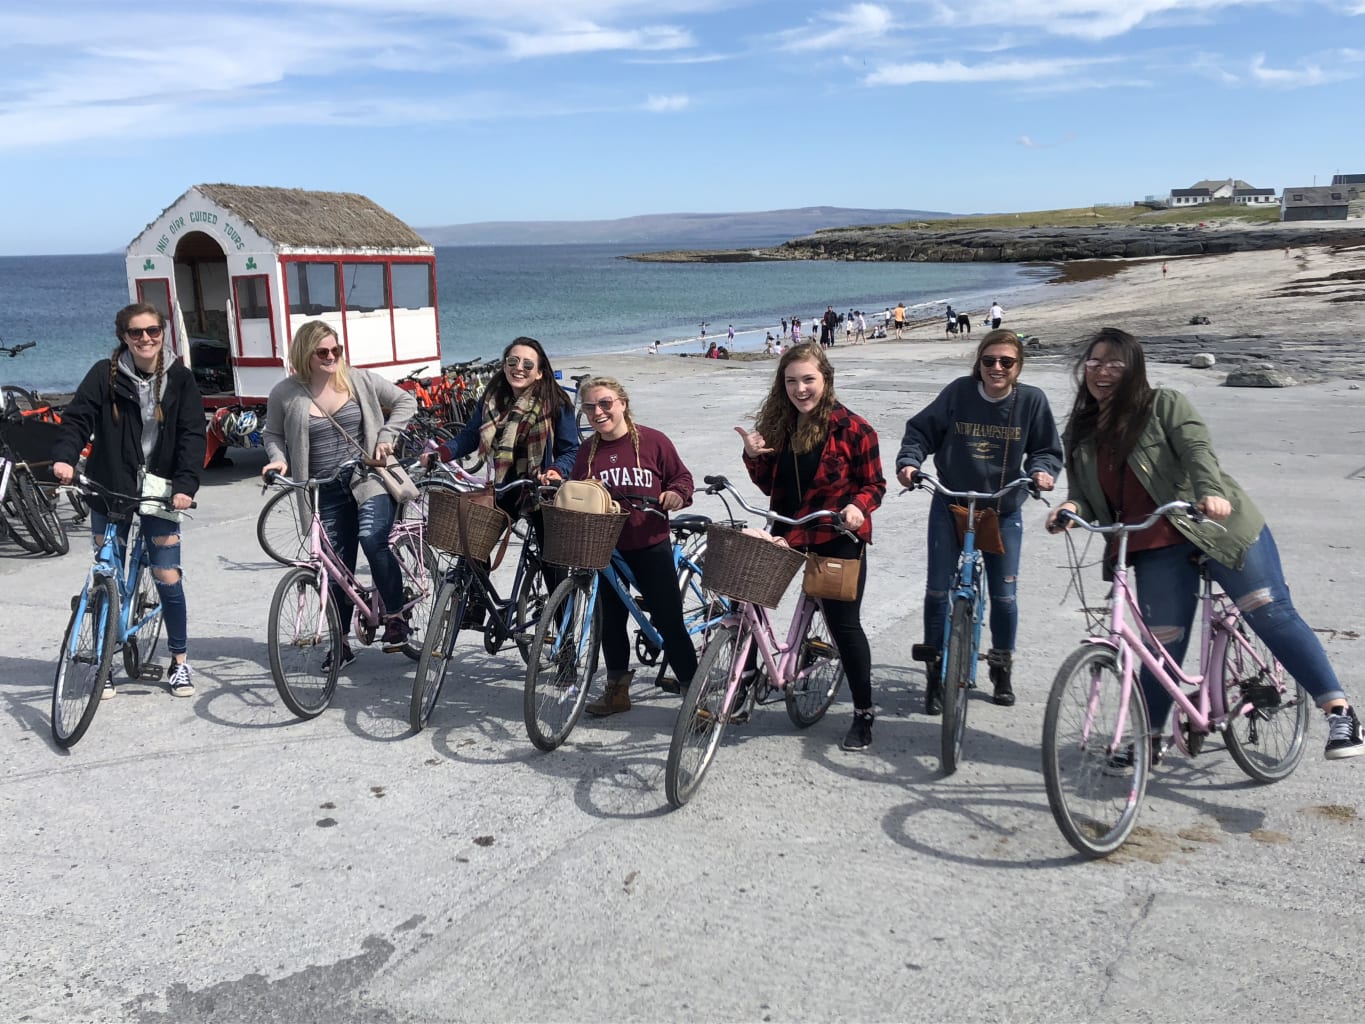 Girls posing on bikes in front of beach.